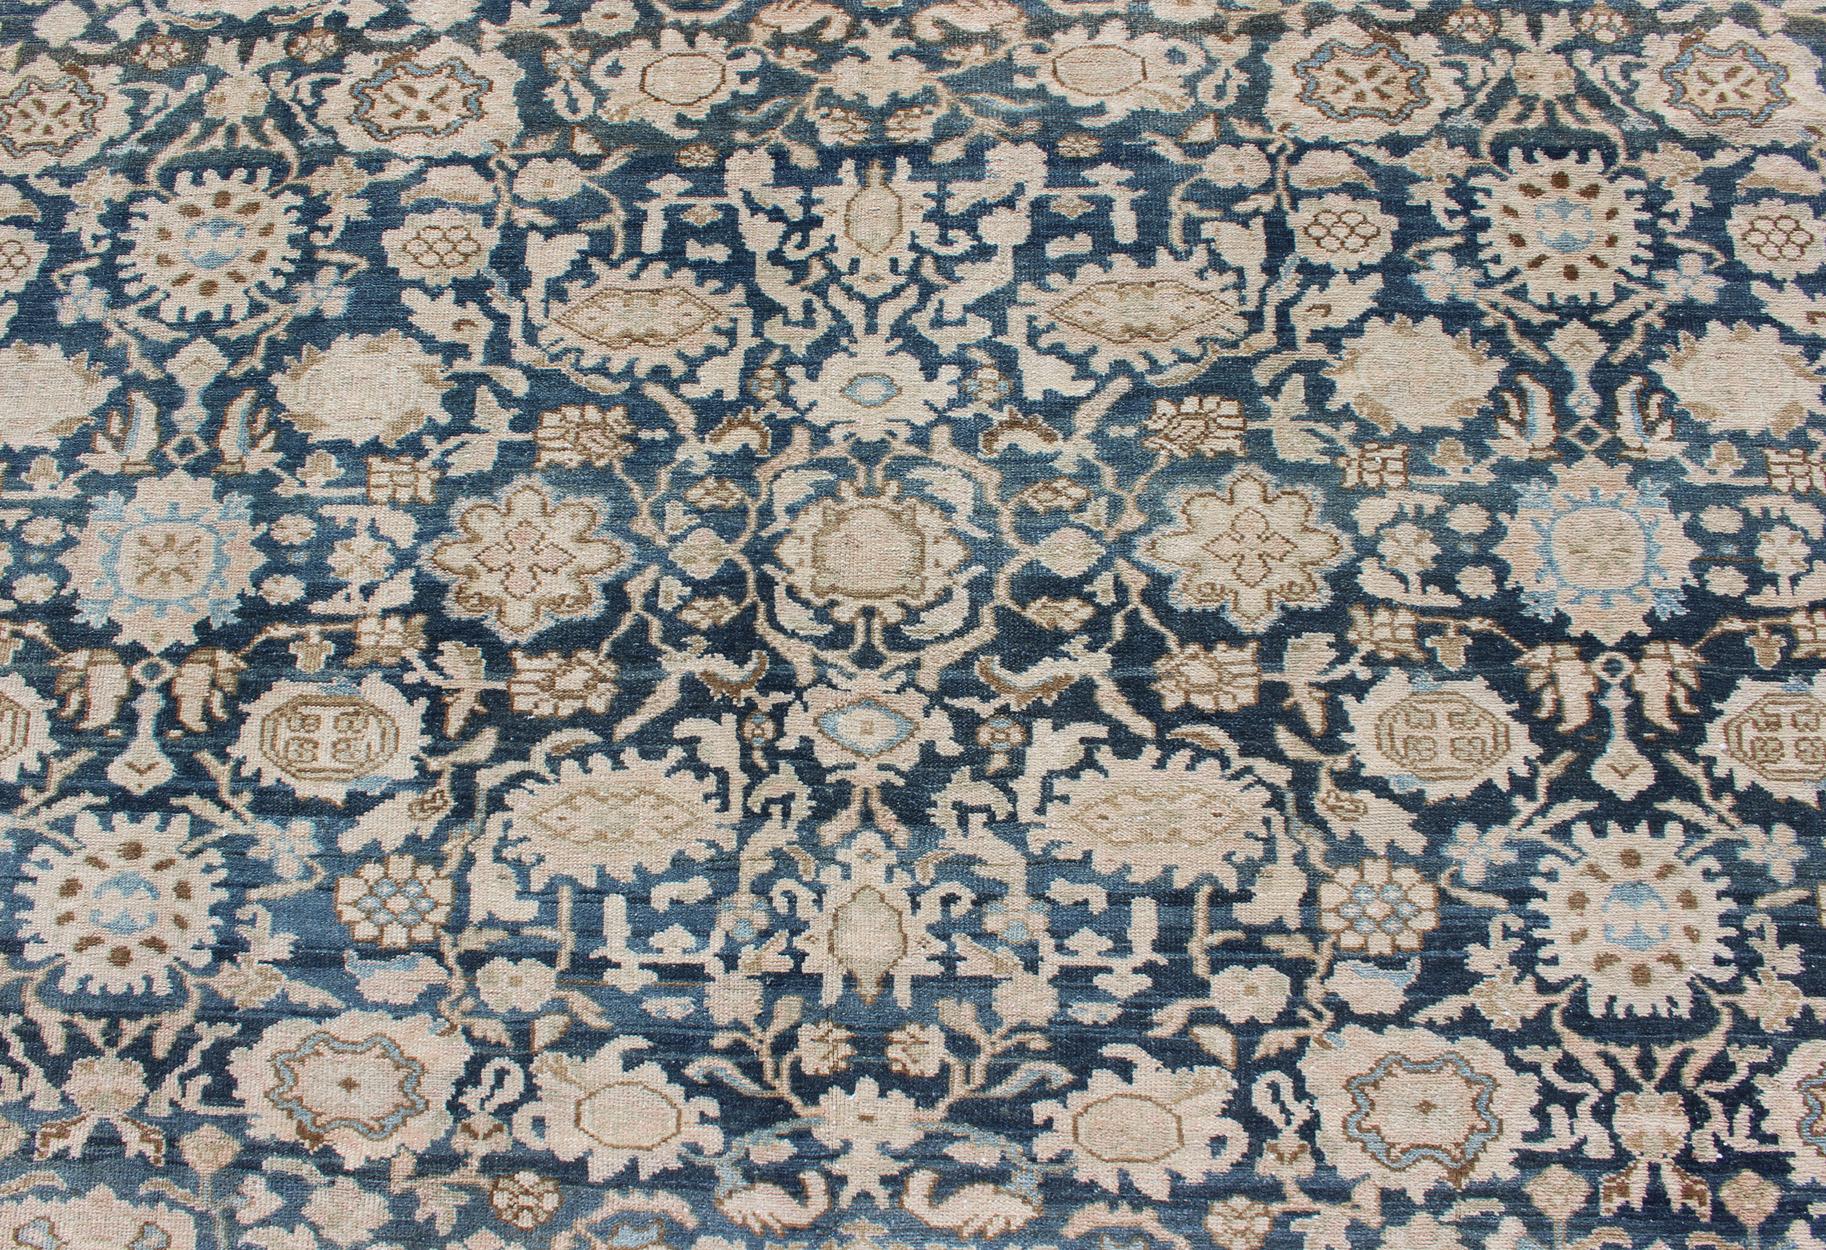 All-Over Blue Floral Persian Hamadan Rug in Navy Blue and Earthy Tones For Sale 2